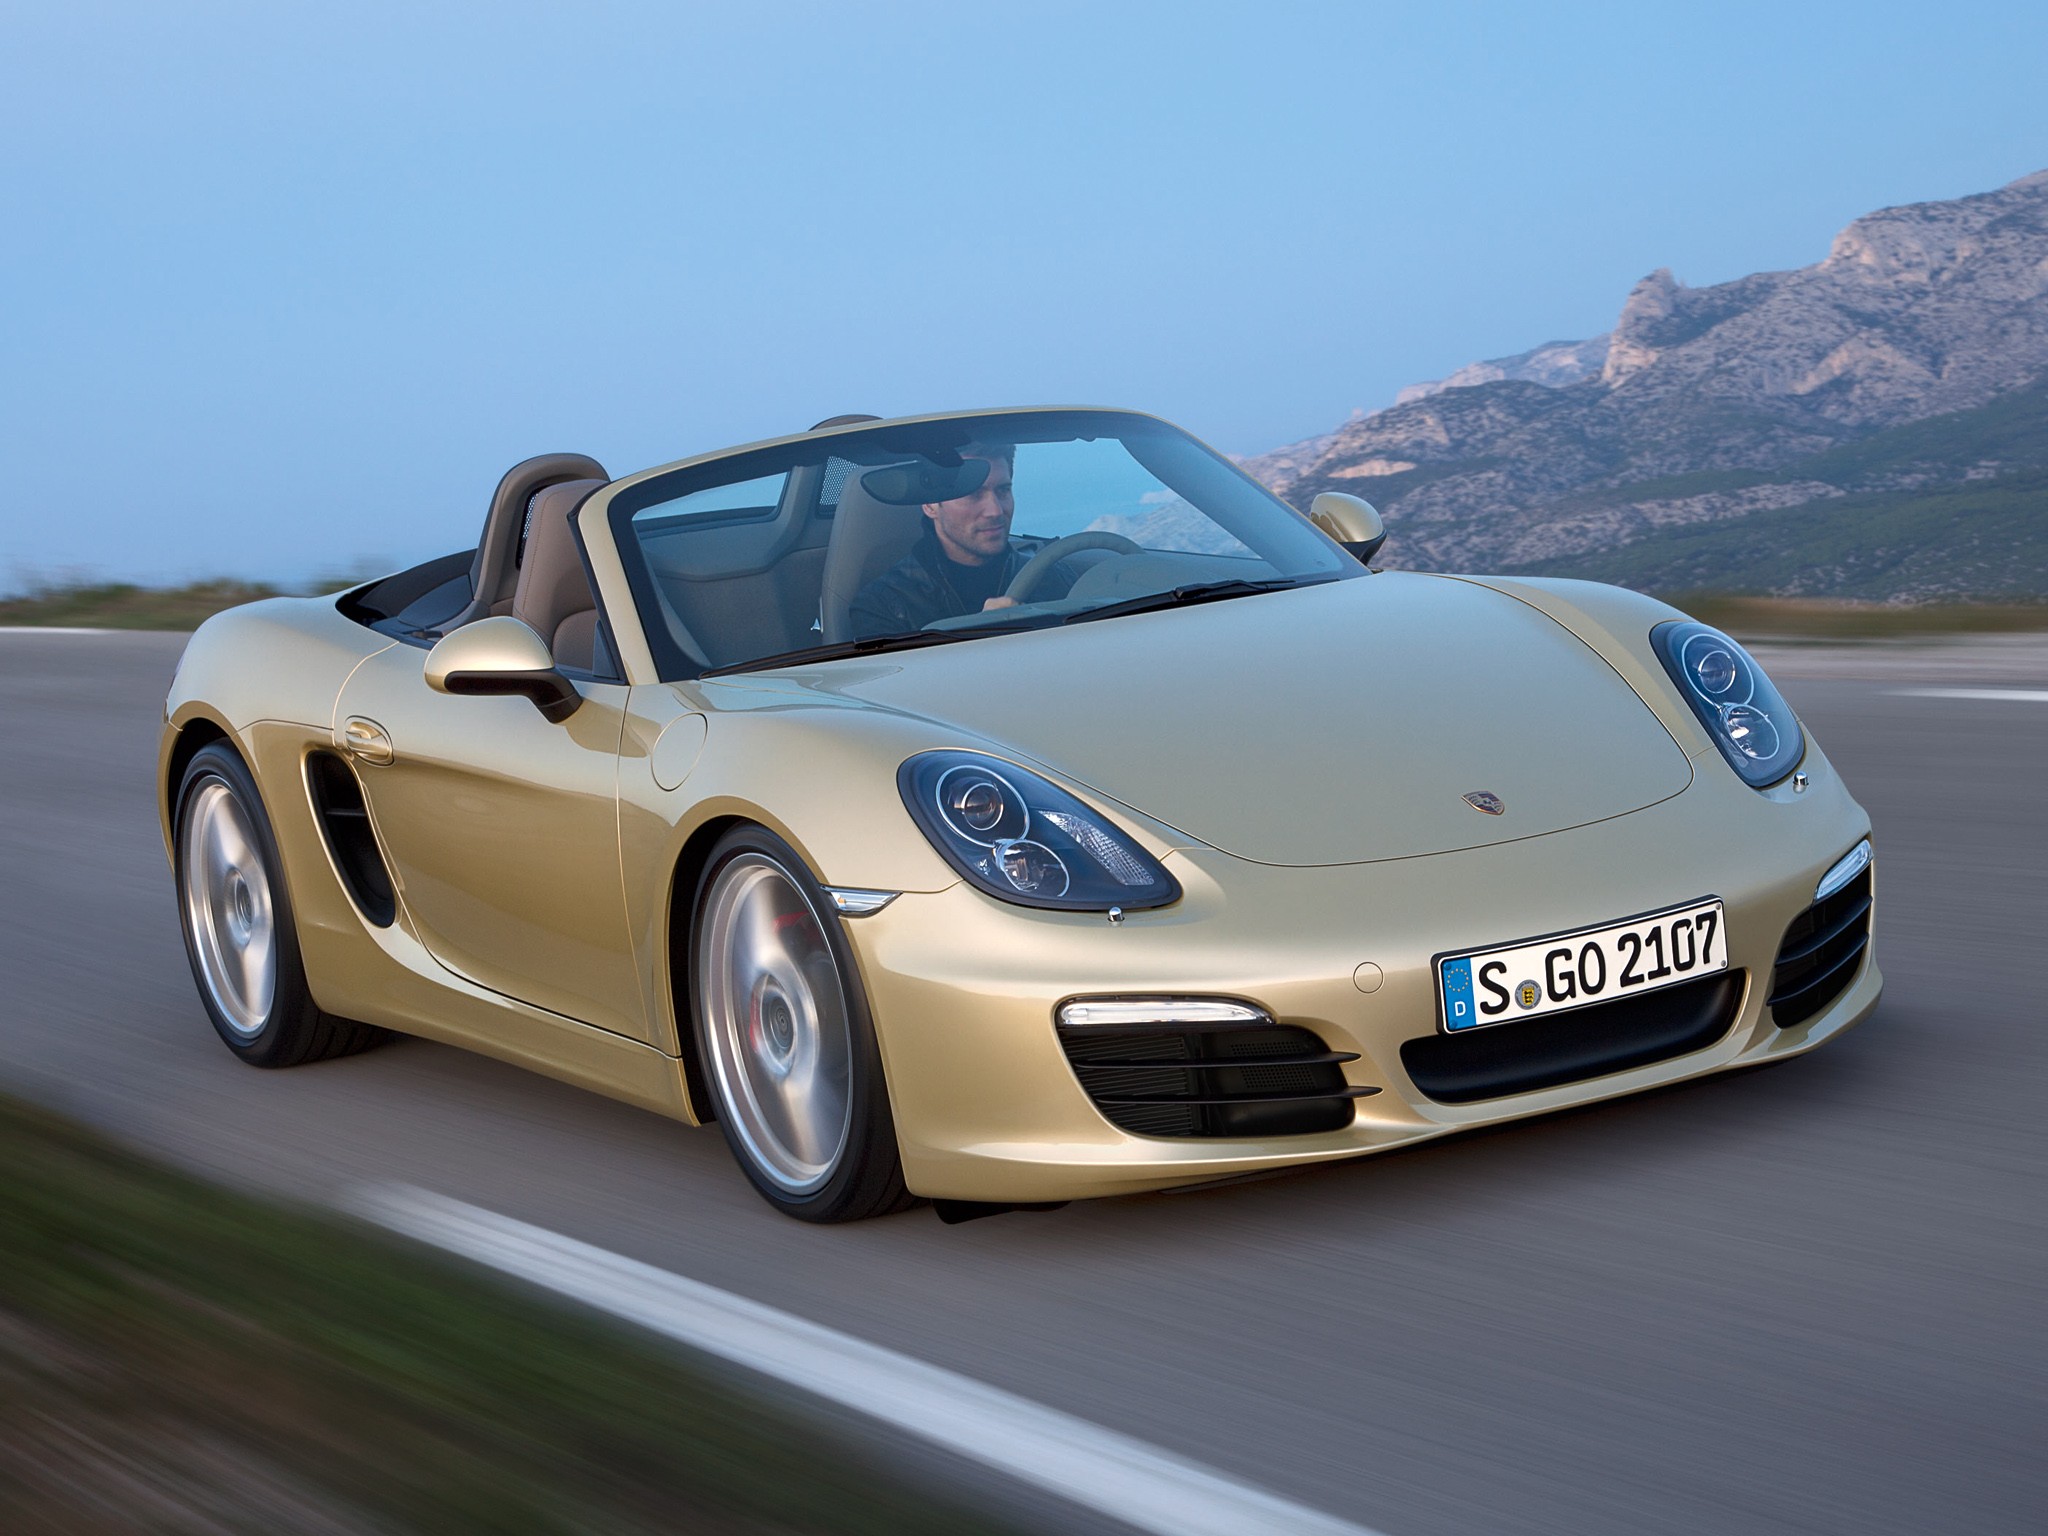 Porsche Boxster S (2016) – Specifications & Performance